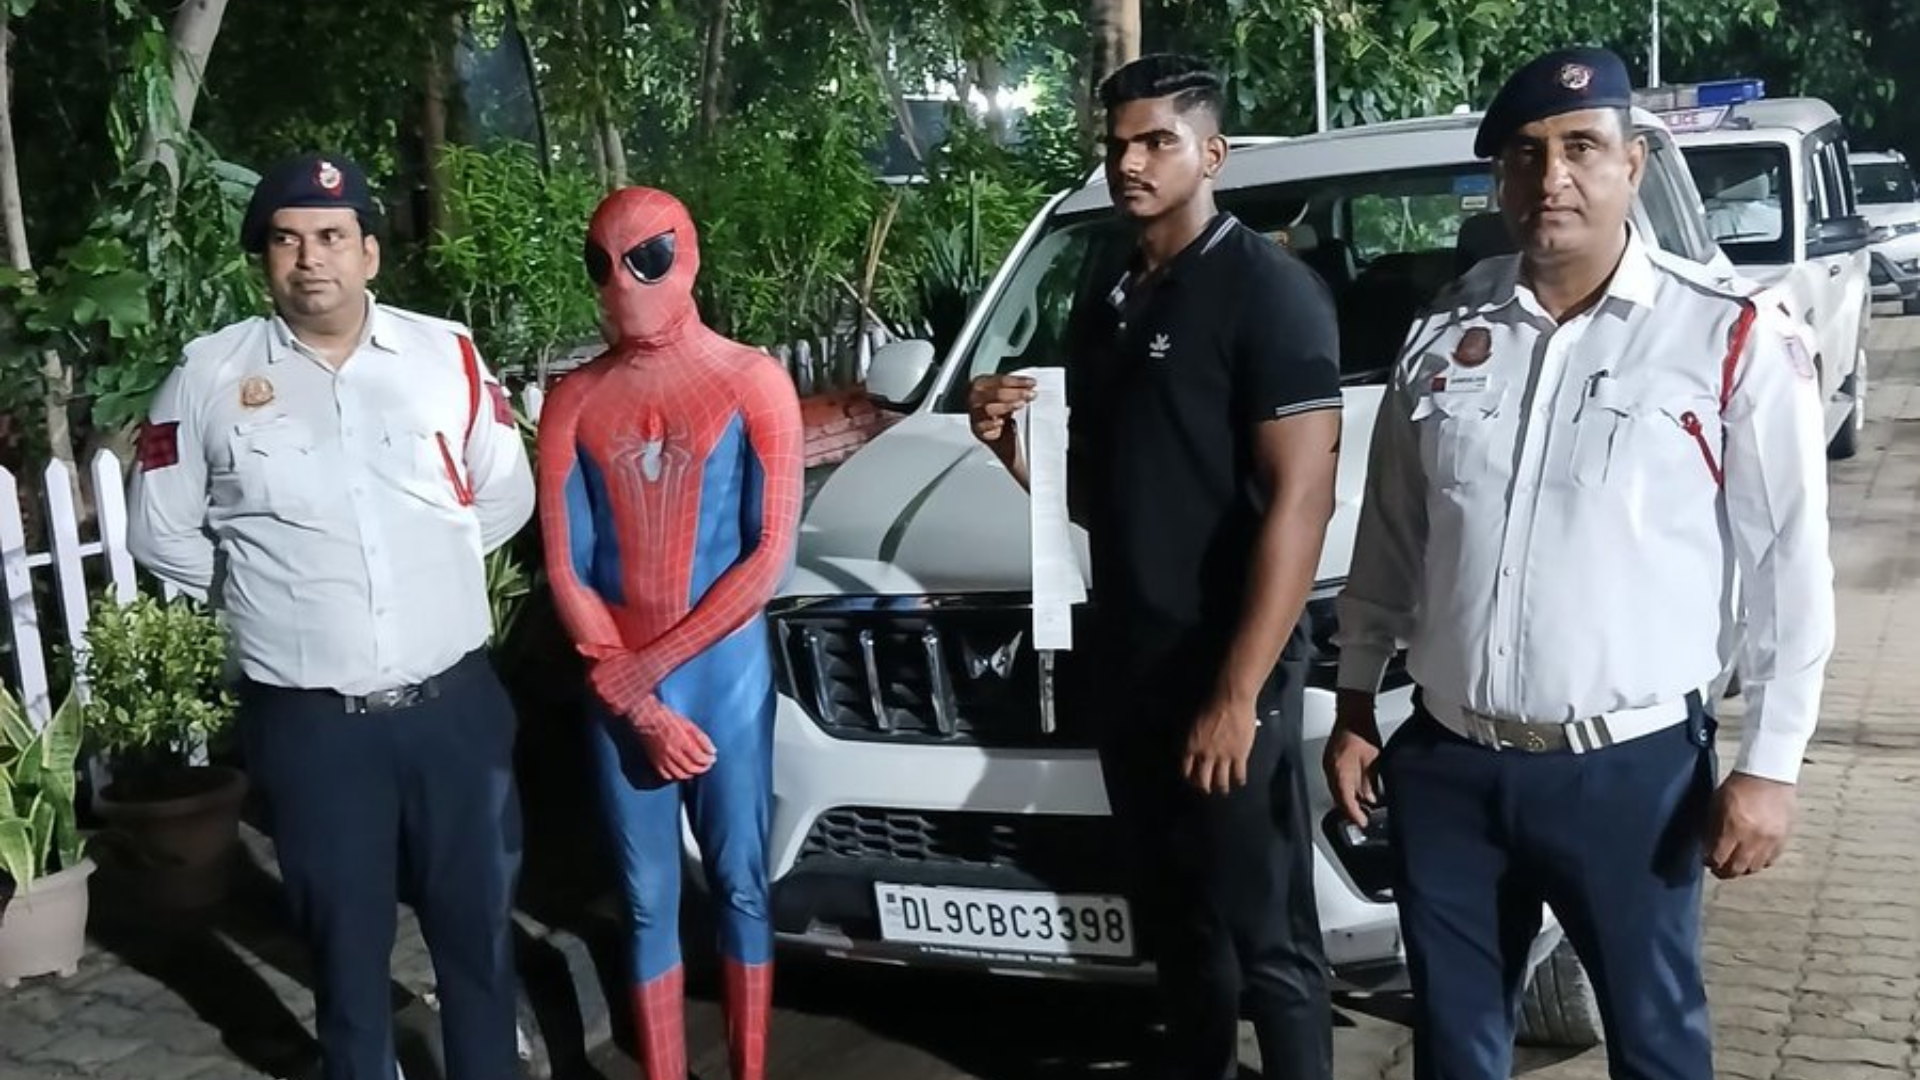 Delhi’s ‘Spiderman’ Stunt Lands Duo Charged With Dangerous Driving